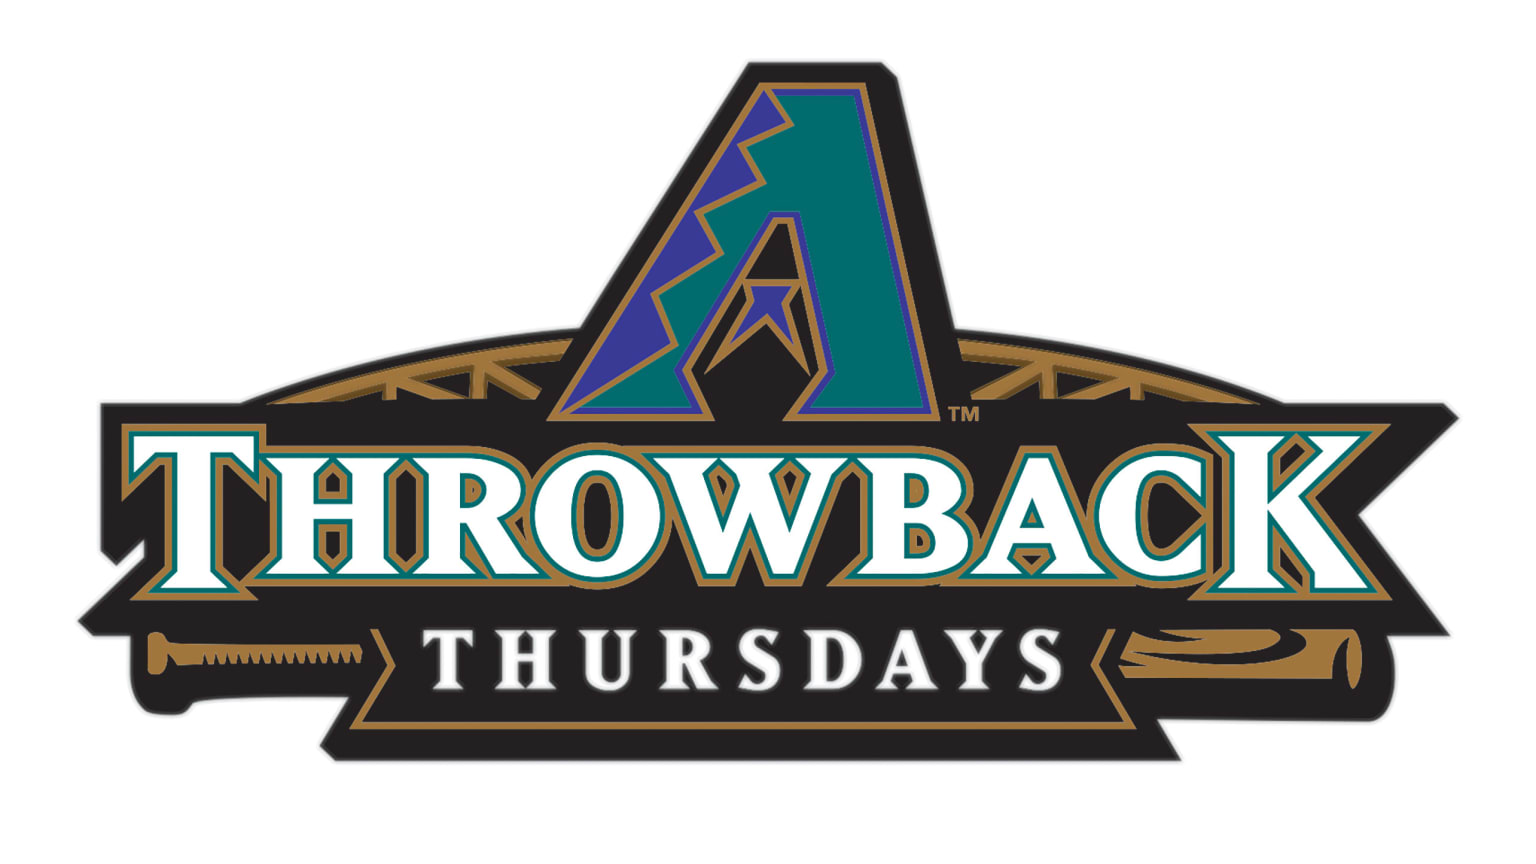 D-backs' 'Throwback Thursday' campaign brought back rich memories